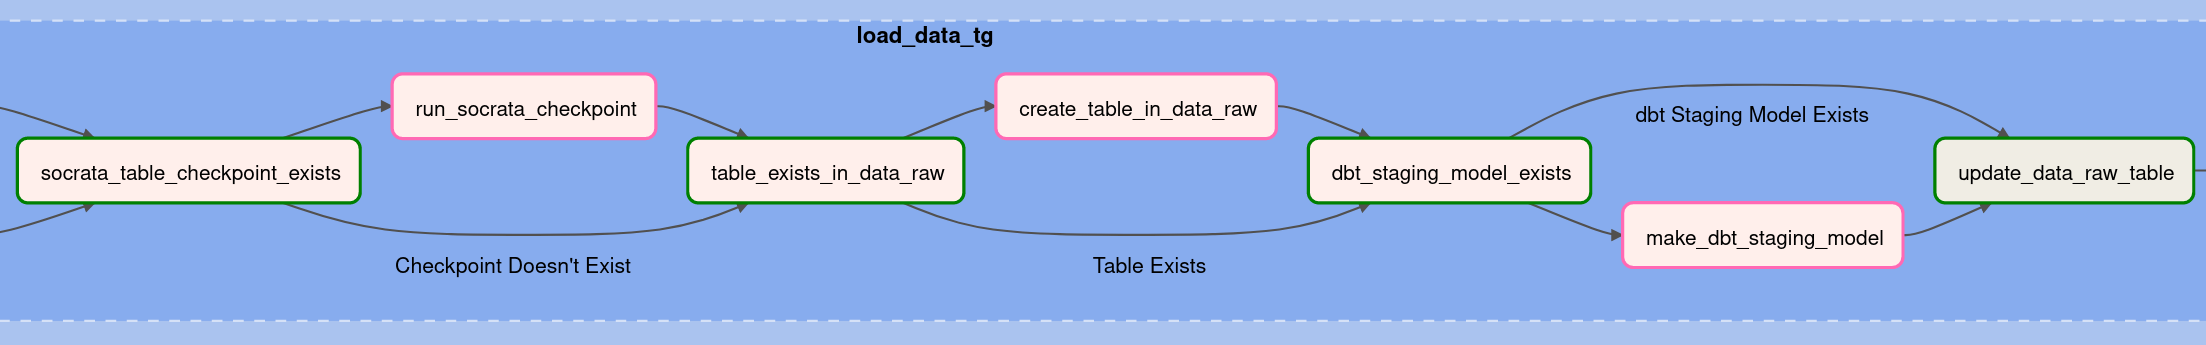 load_data_tg TaskGroup data_raw table-maker and dbt model generator